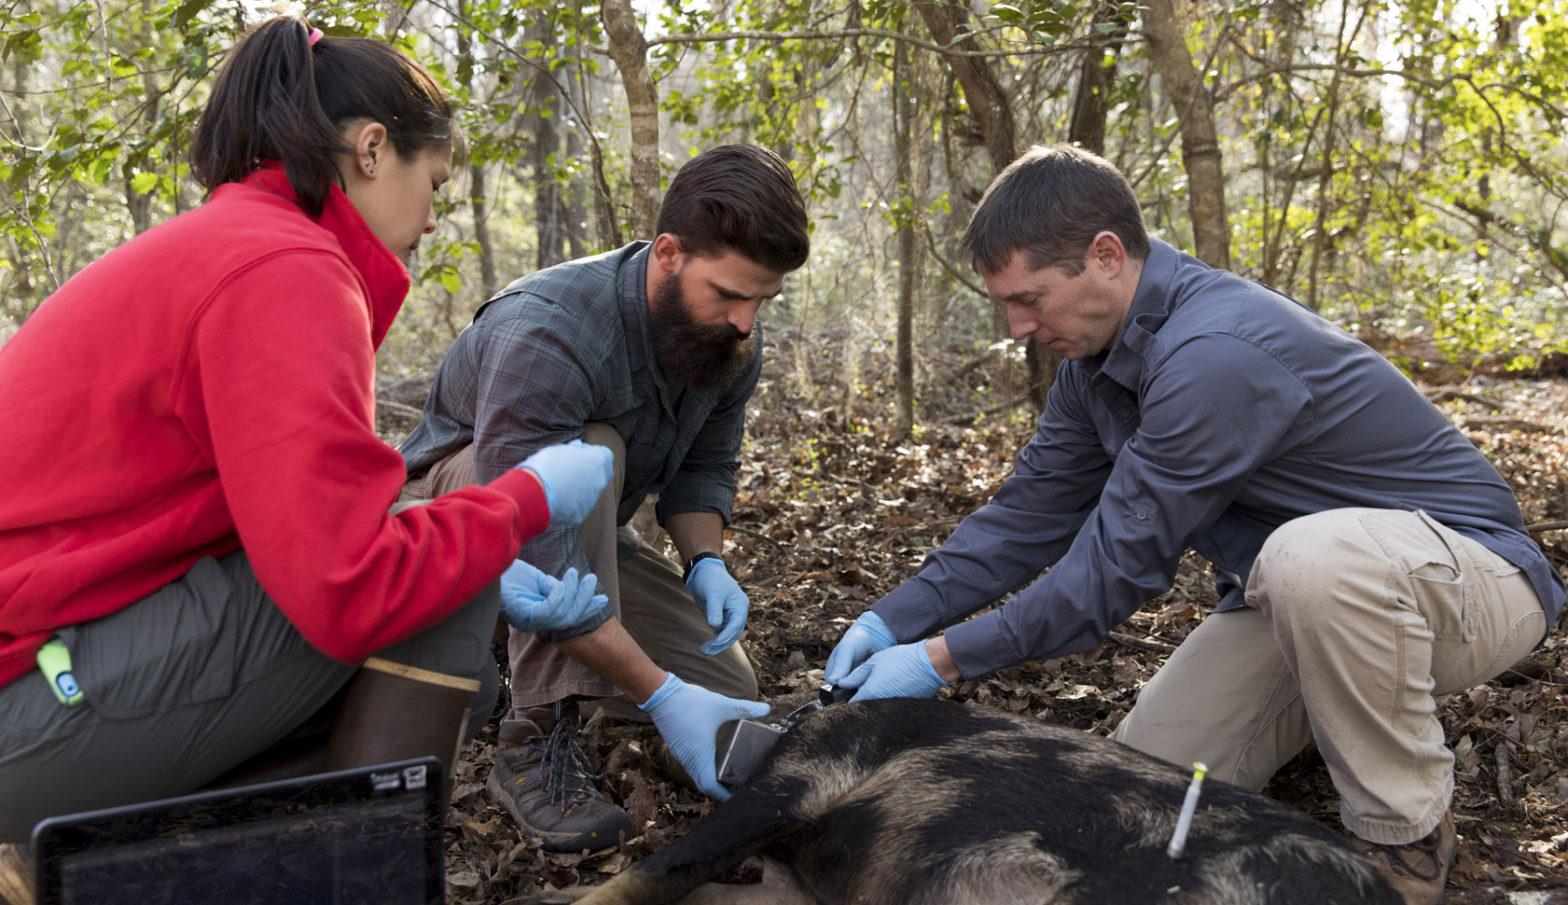 PhD student Sarah Chinn, left to right, research technician Jacob Ashe, and professor James Beasley place a tracking collar on a wild hog in the field on the Savannah River Site.